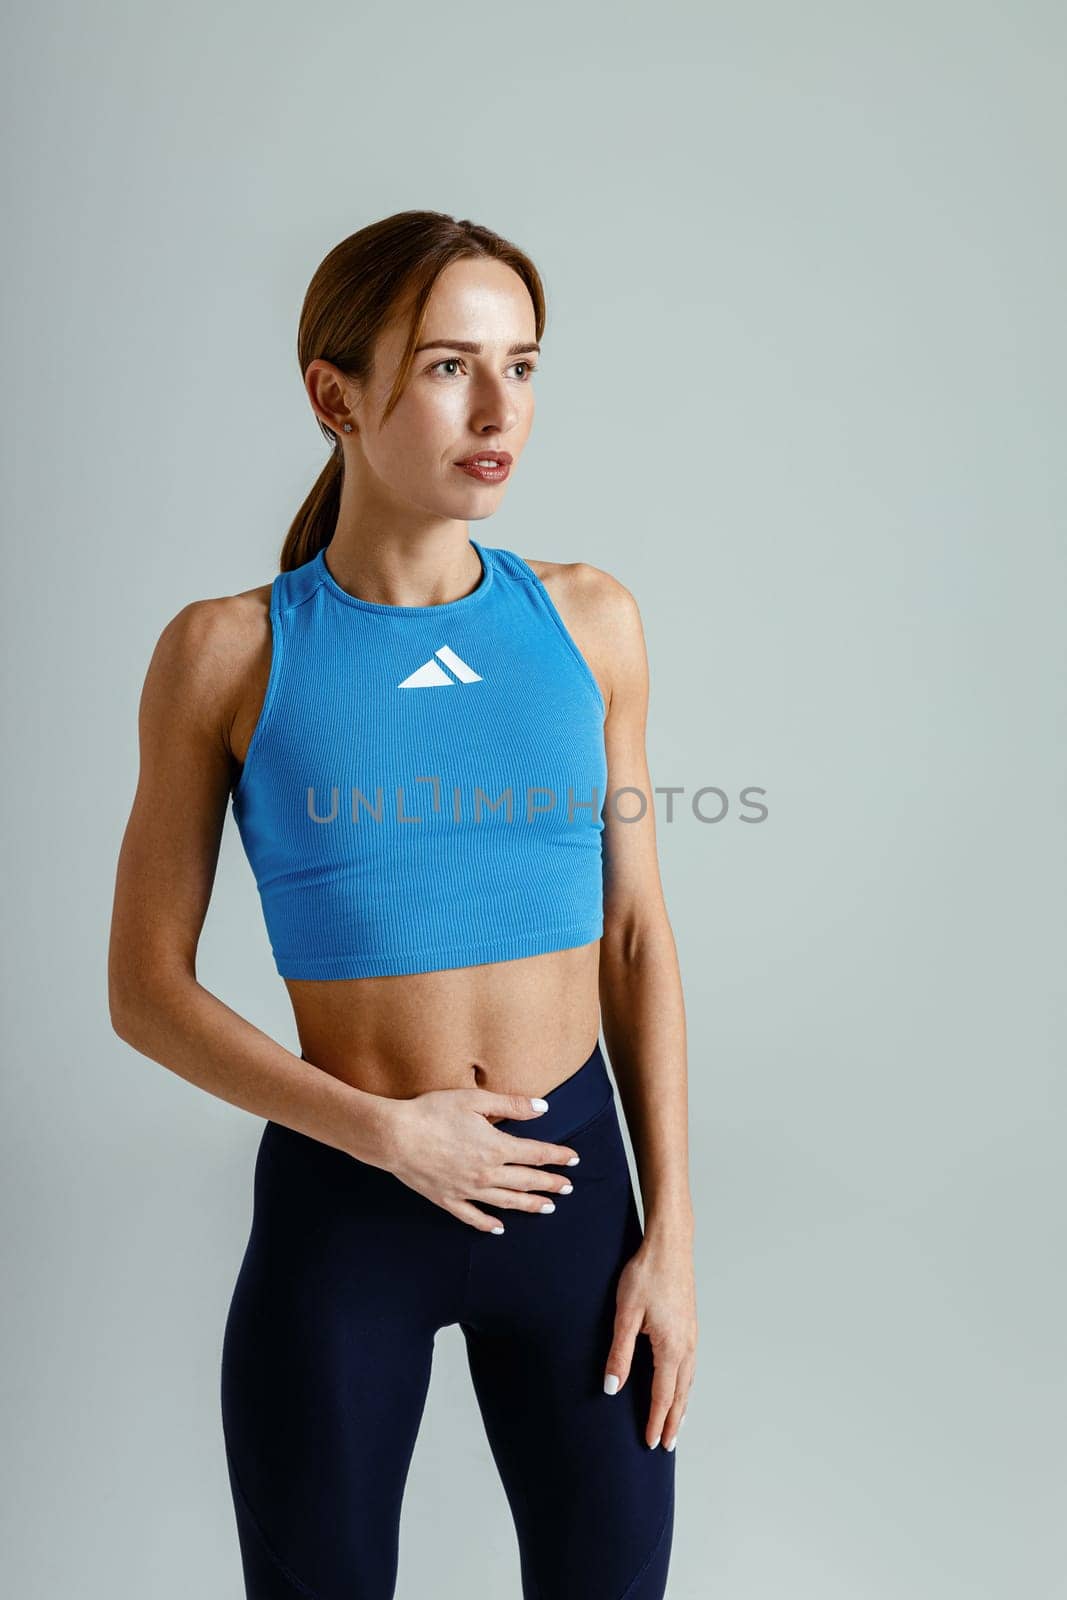 Attractive fitness woman wearing sportswear looking at side on studio background. High quality photo